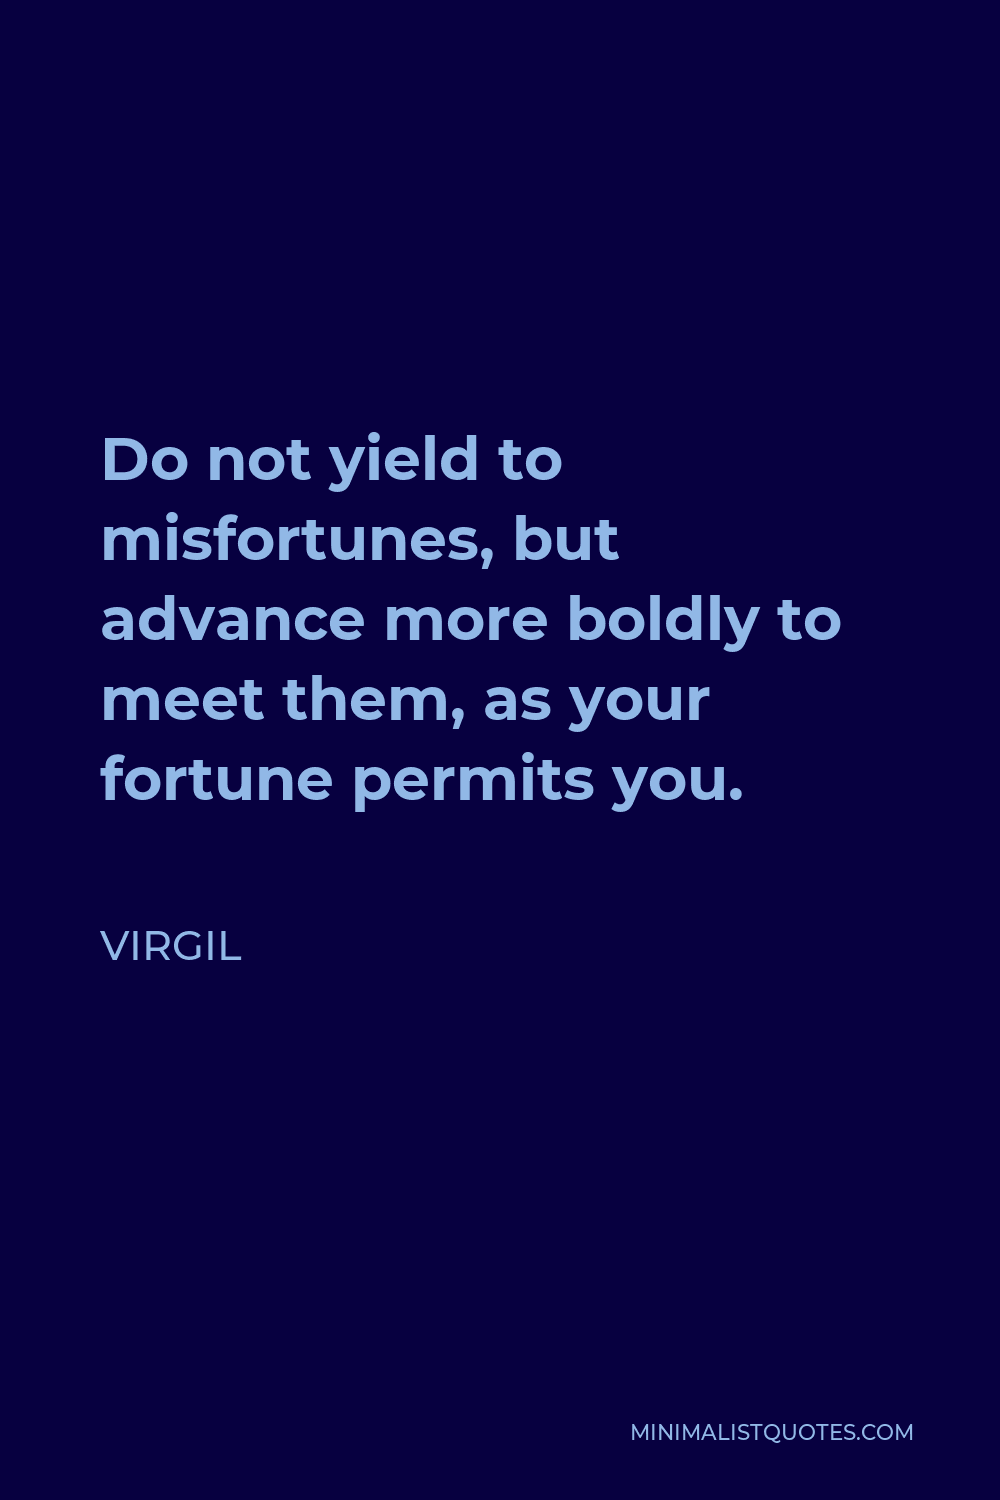 Virgil Quote - Do not yield to misfortunes, but advance more boldly to meet them, as your fortune permits you.